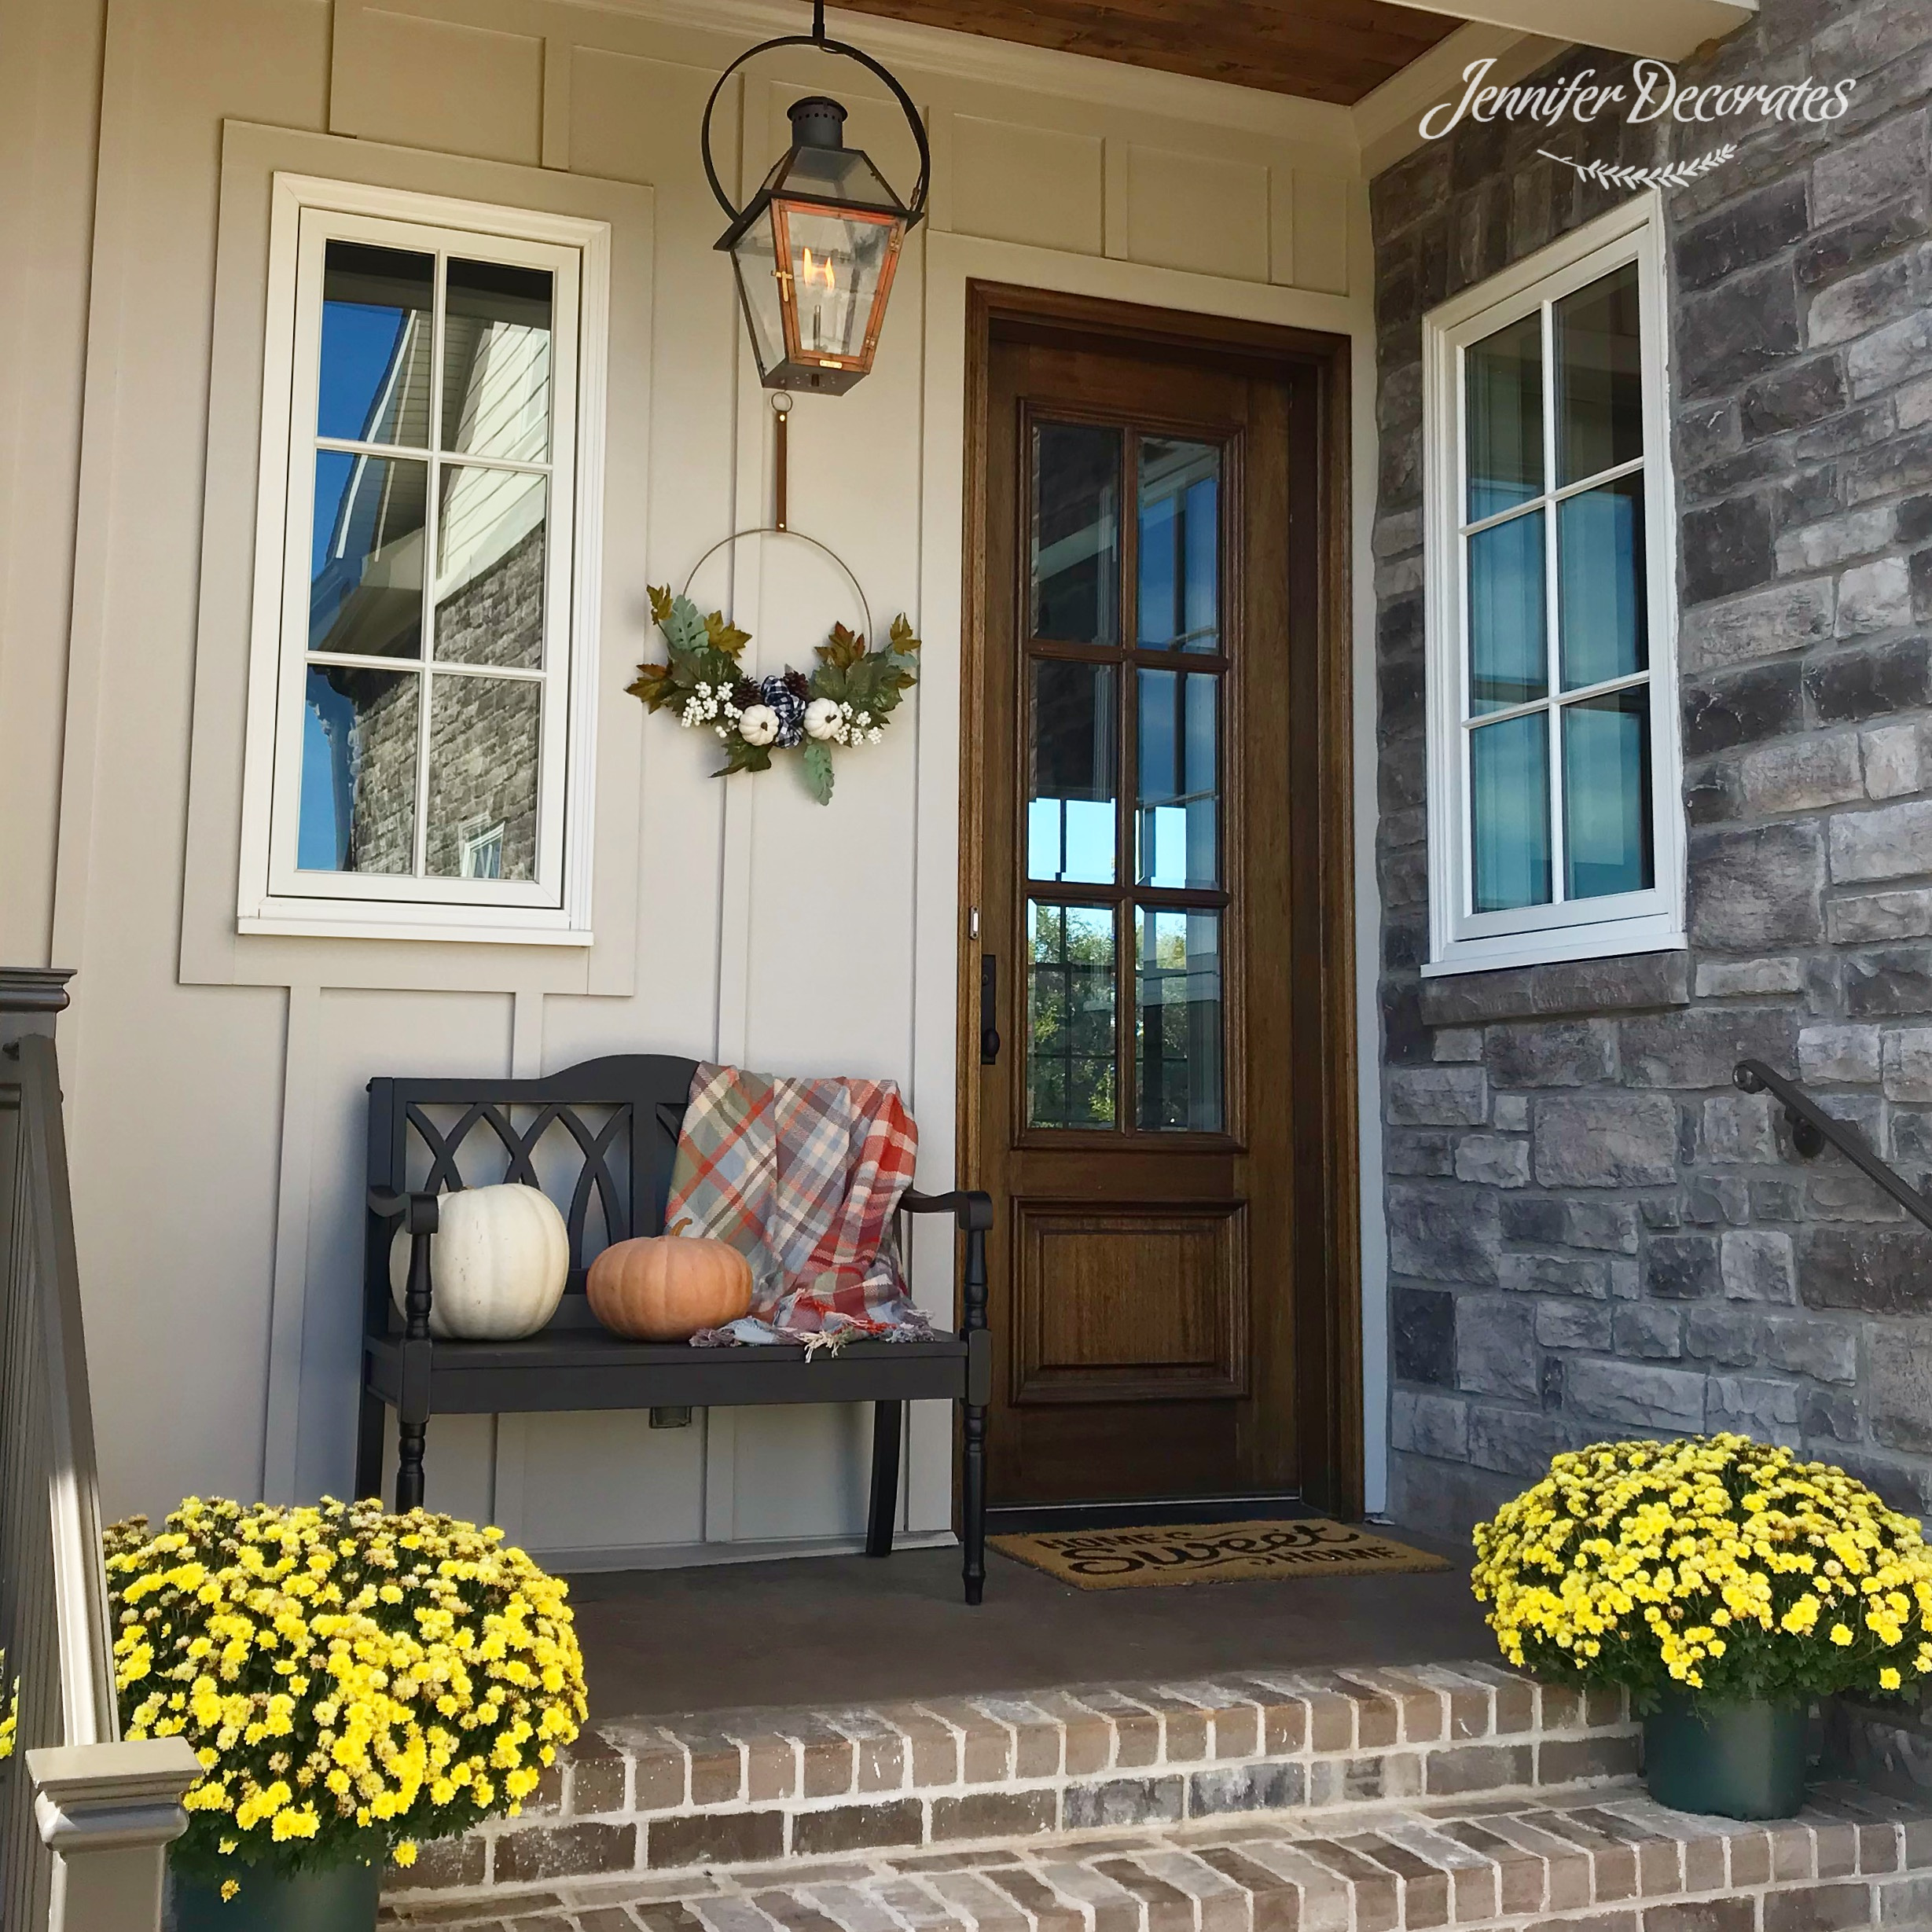 Fall Porch Decorating Ideas You Have To See Jennifer Decorates